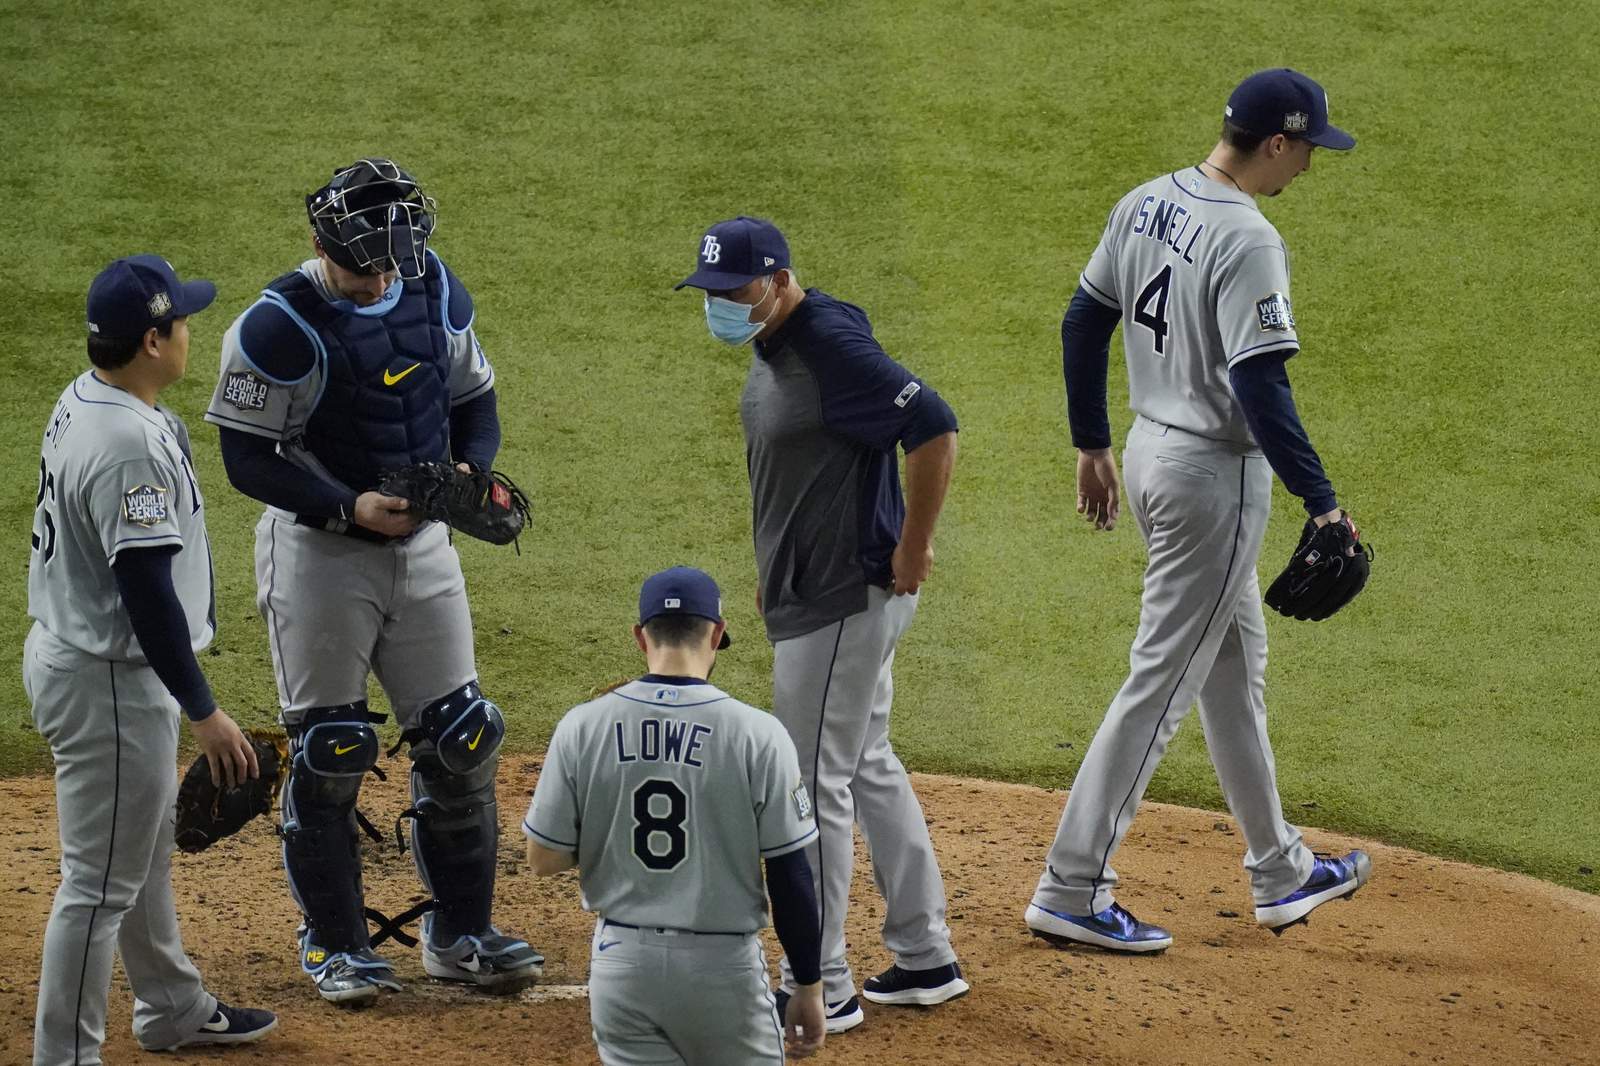 Cashed Out: Rays manager roasted for pulling Snell in Game 6